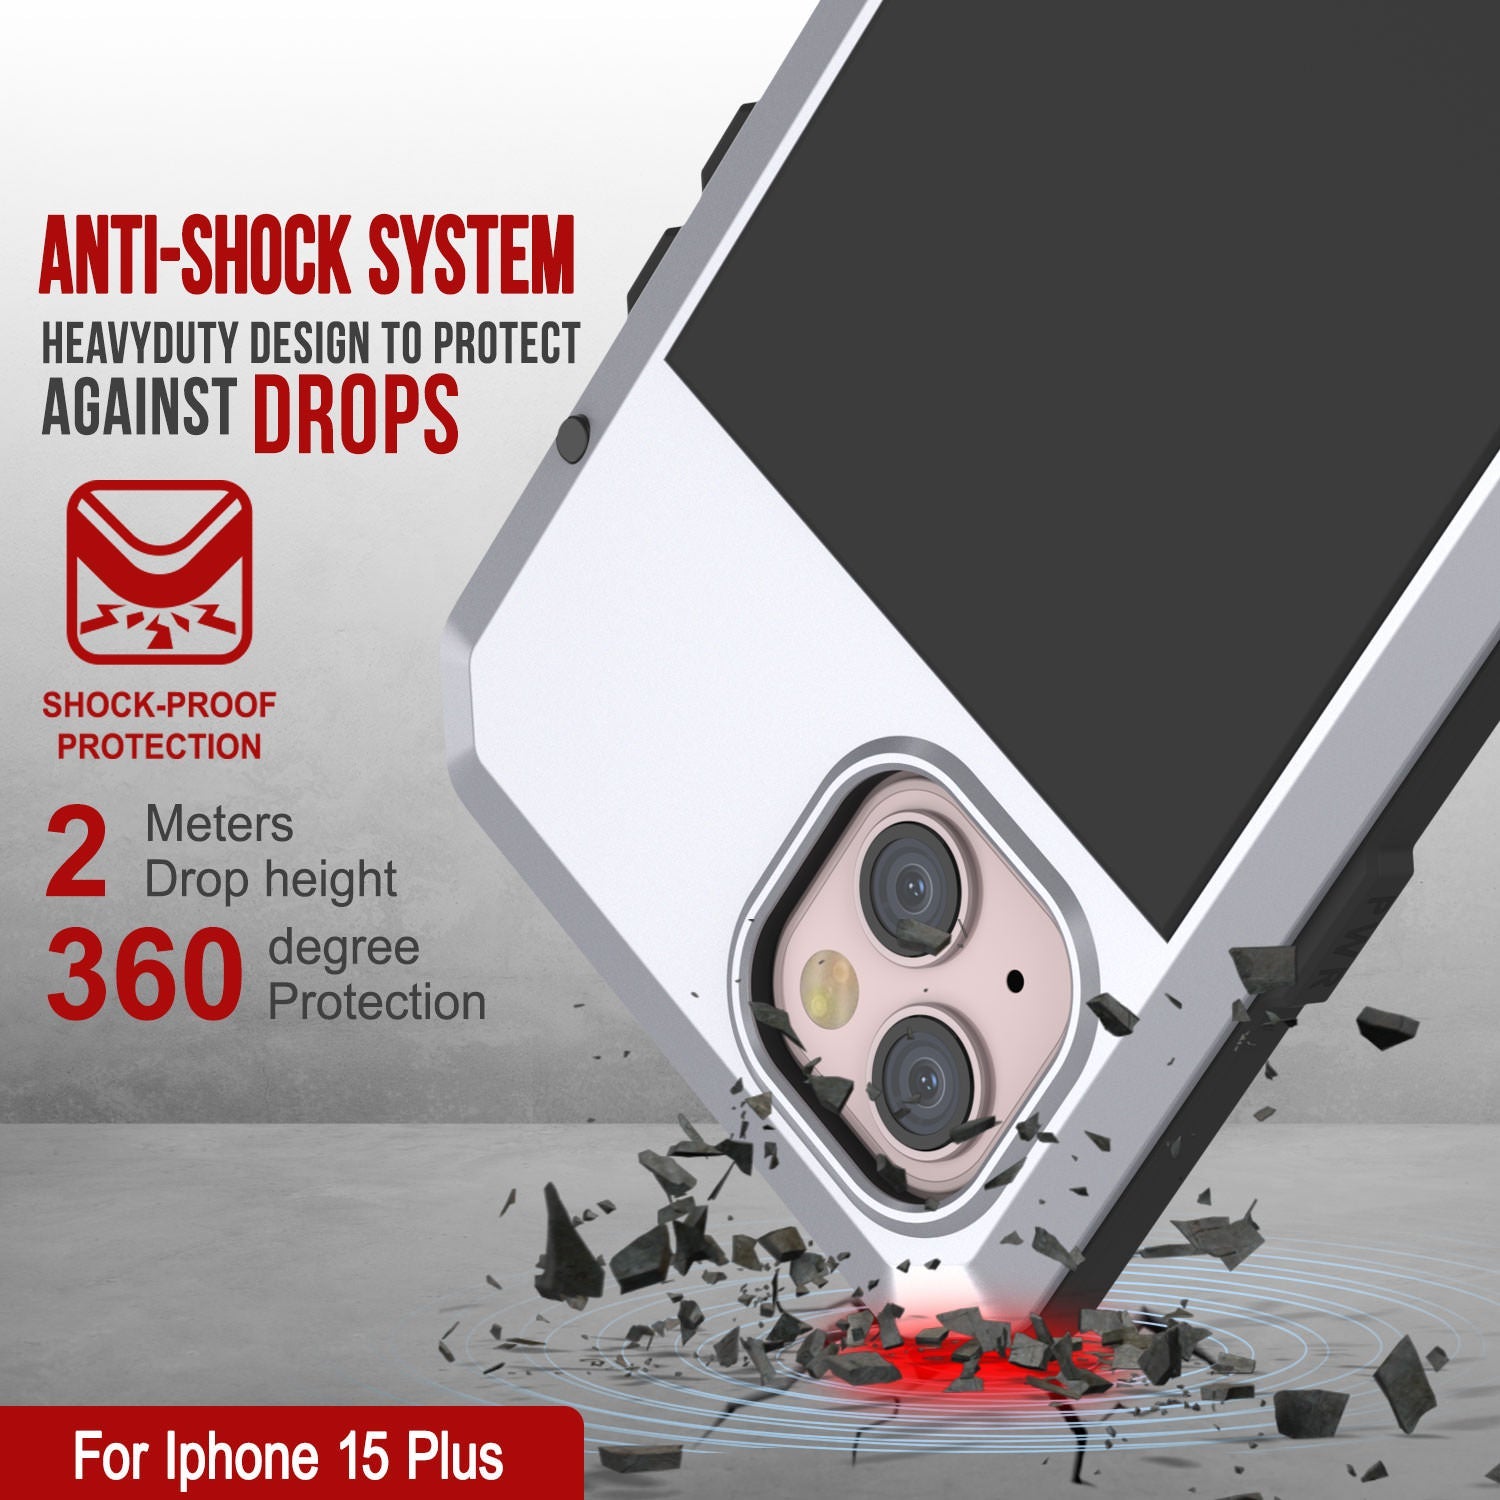 iPhone 15 Plus Metal Case, Heavy Duty Military Grade Armor Cover [shock proof] Full Body Hard [White]